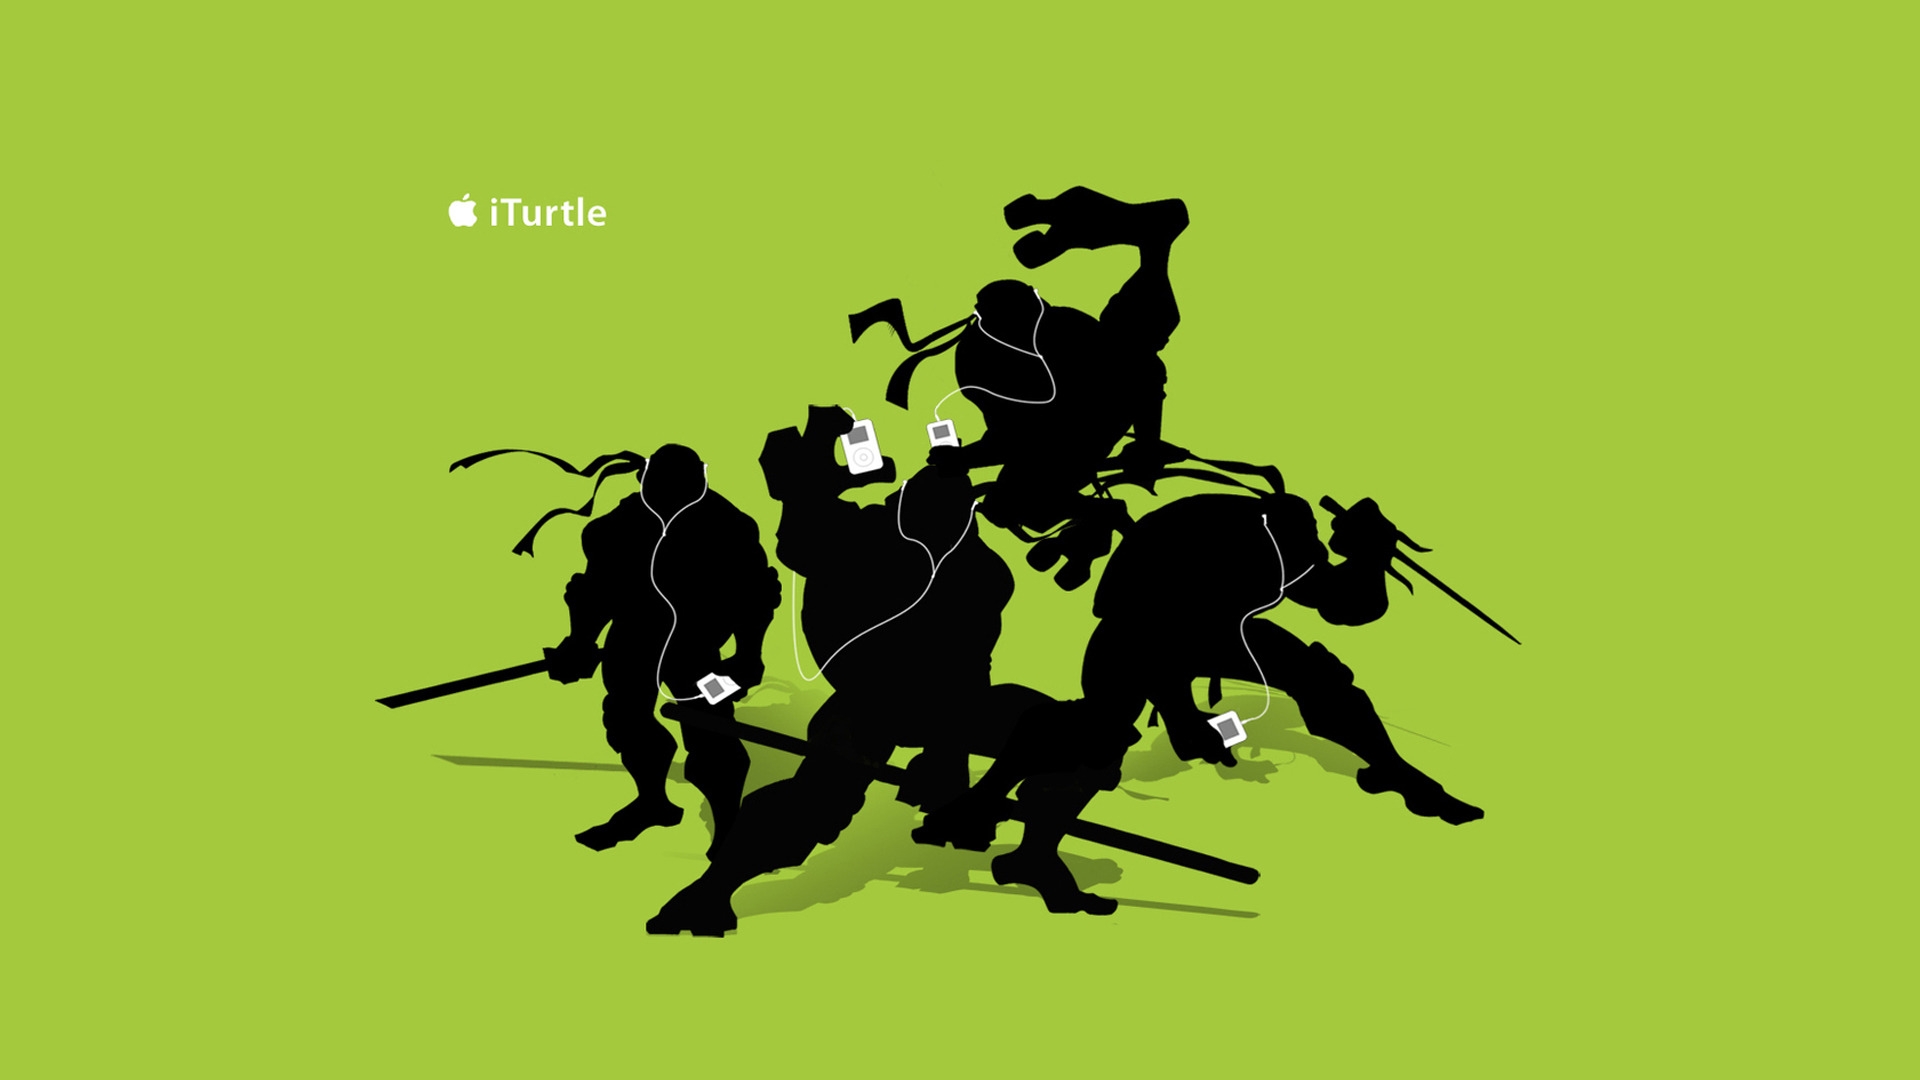 iTurtle for 1920 x 1080 HDTV 1080p resolution